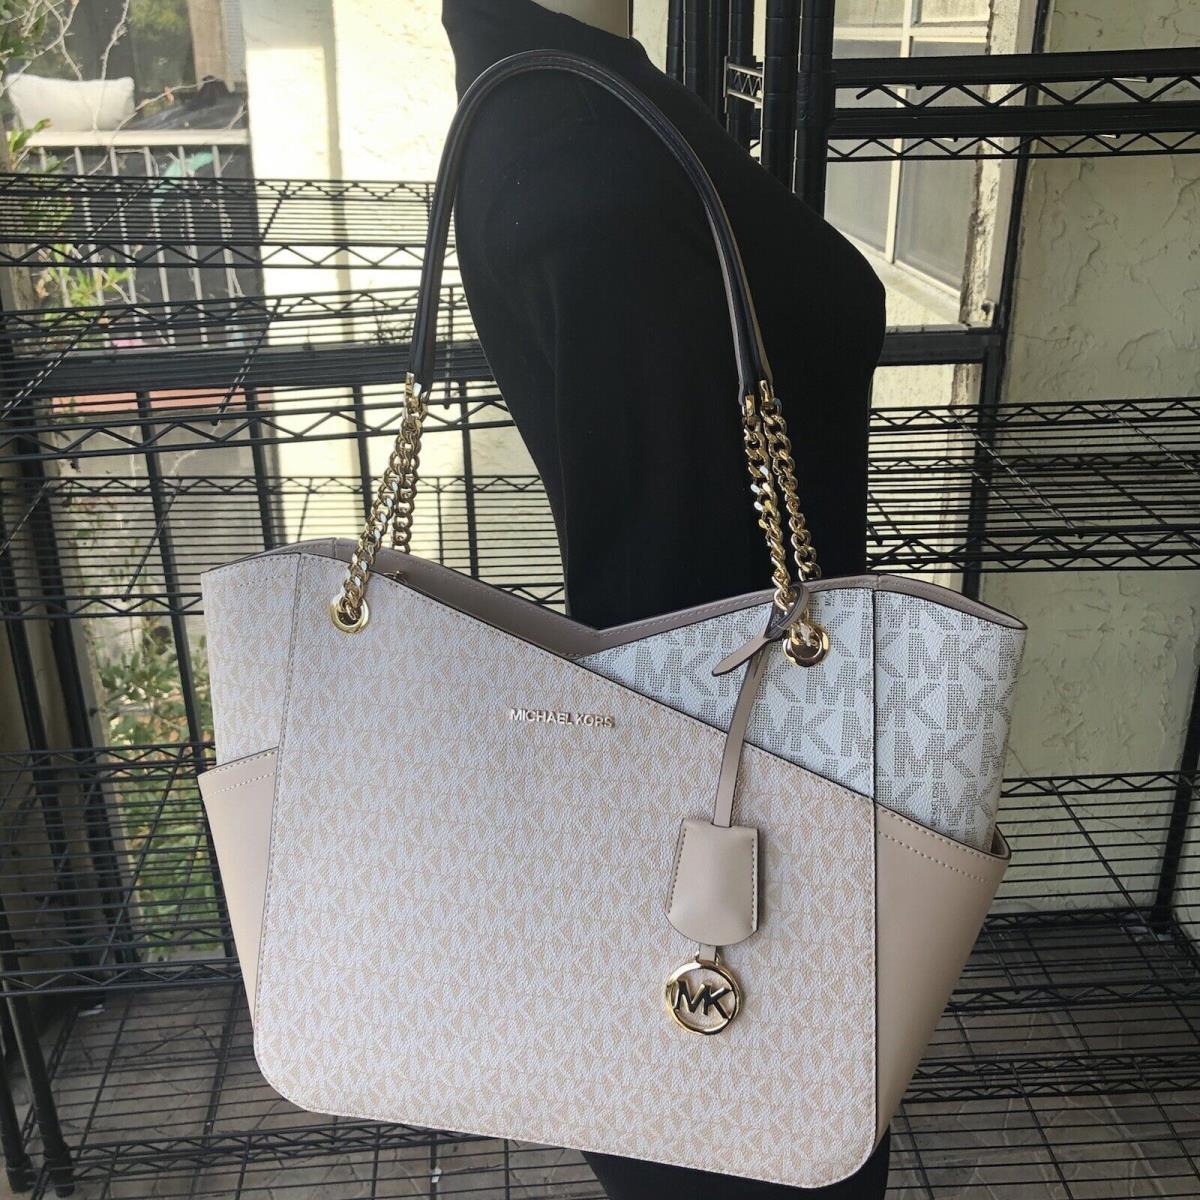 MICHAEL KORS PURSE | Ace Rent To Own